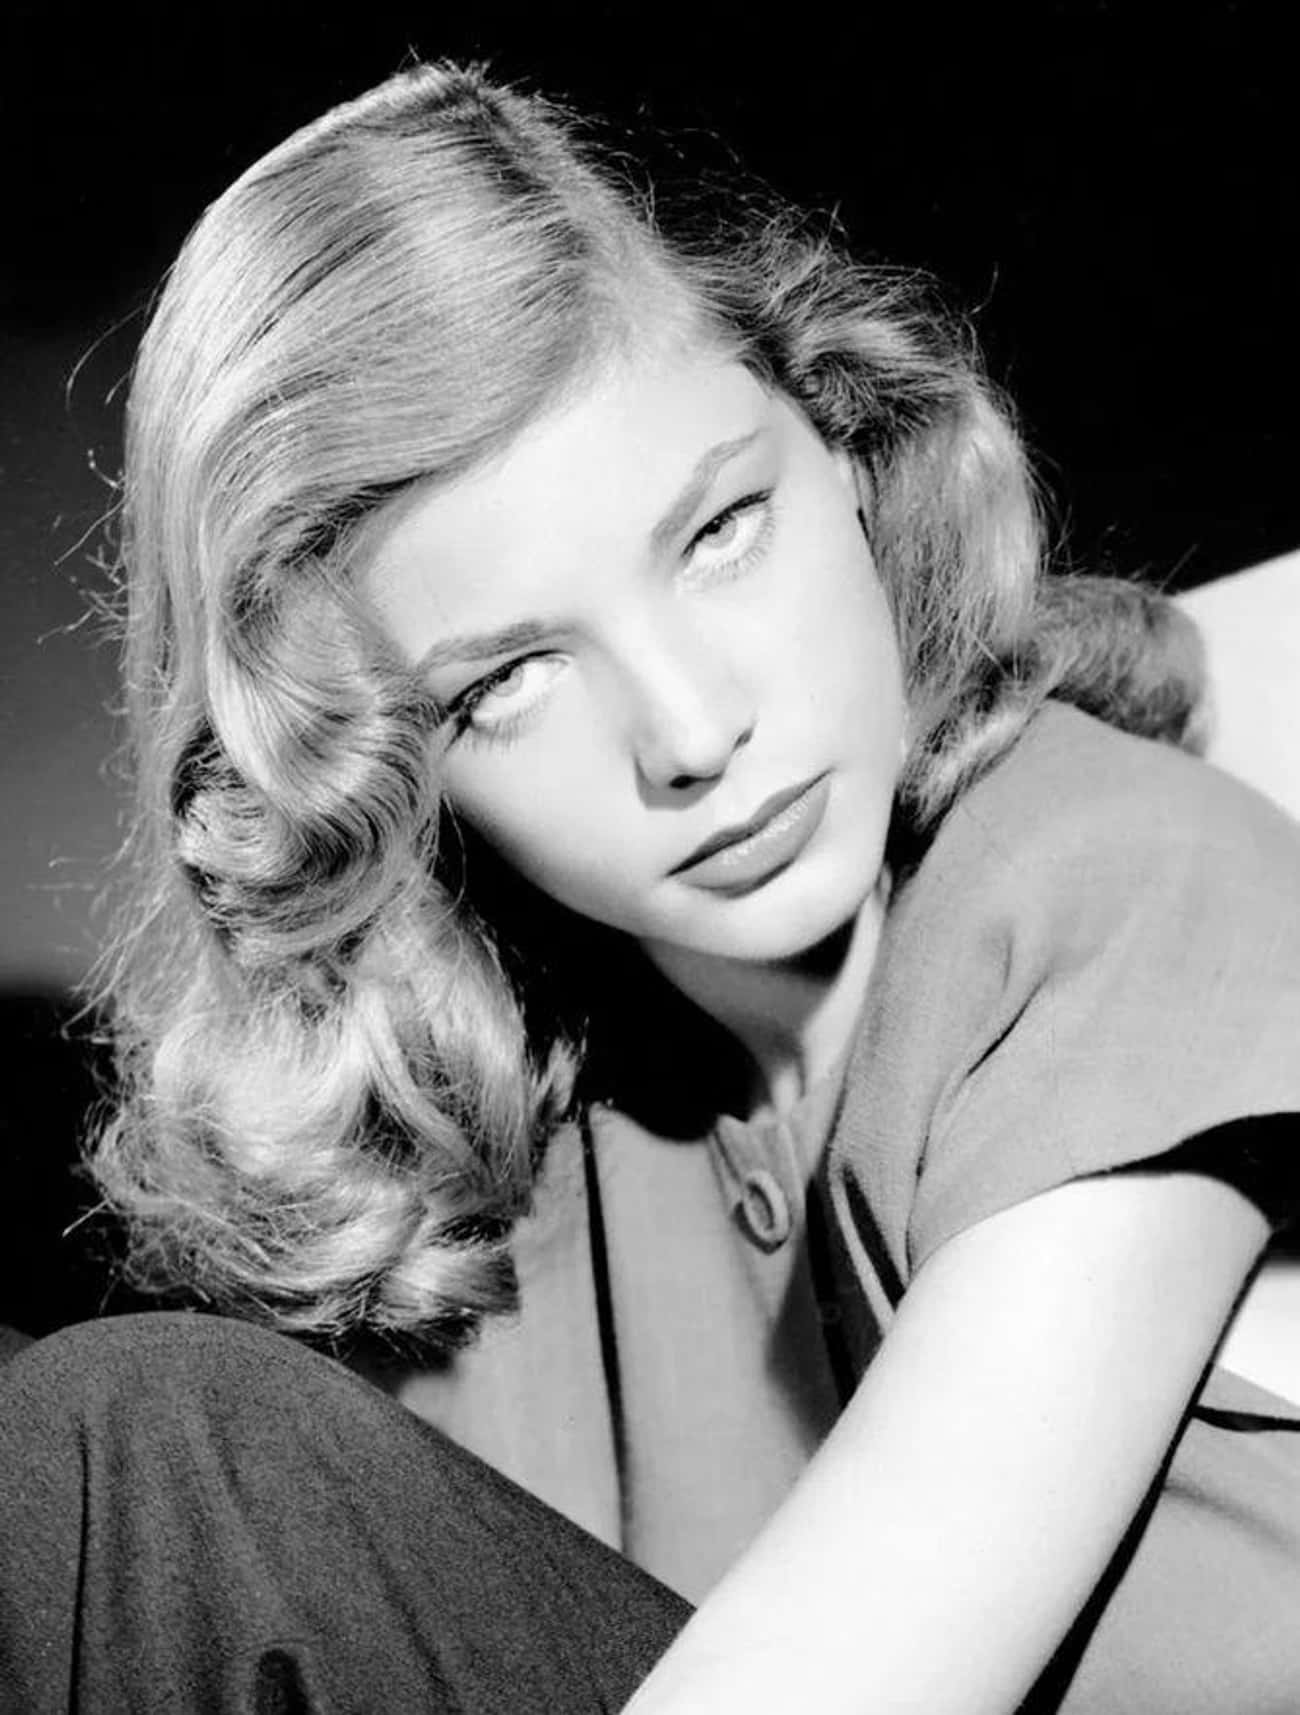 Lauren Bacall Said Frank Sinatra Broke Off Their Engagement And Ghosted Her